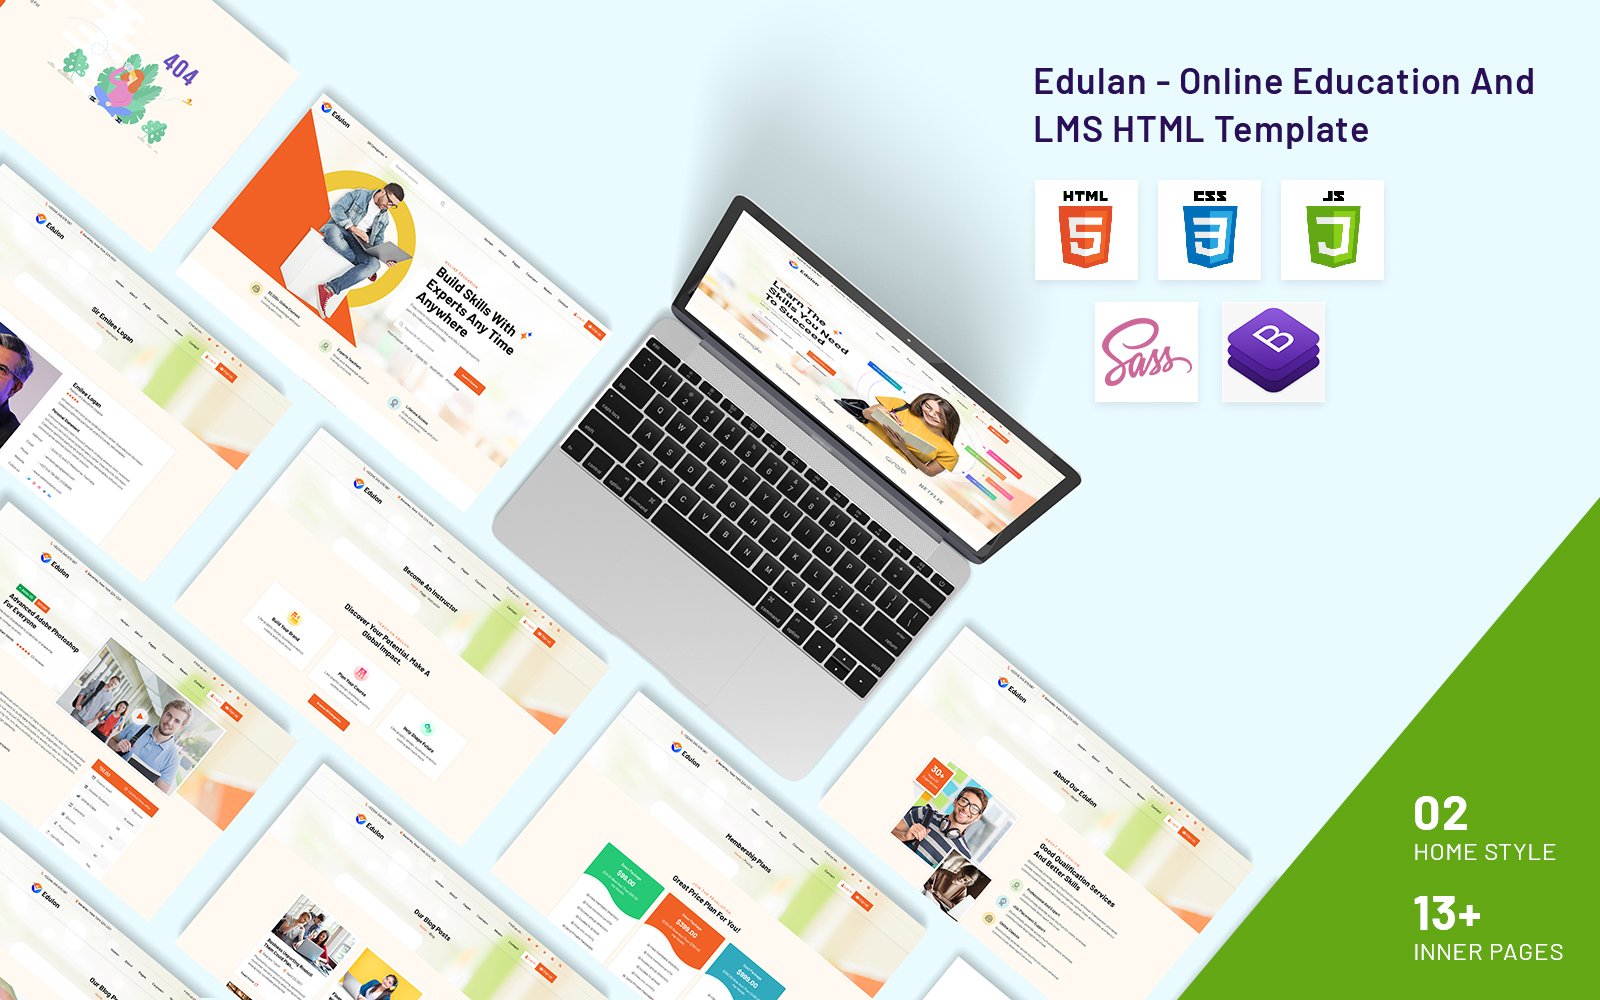 Edulan - Online Education and LMS HTML Template